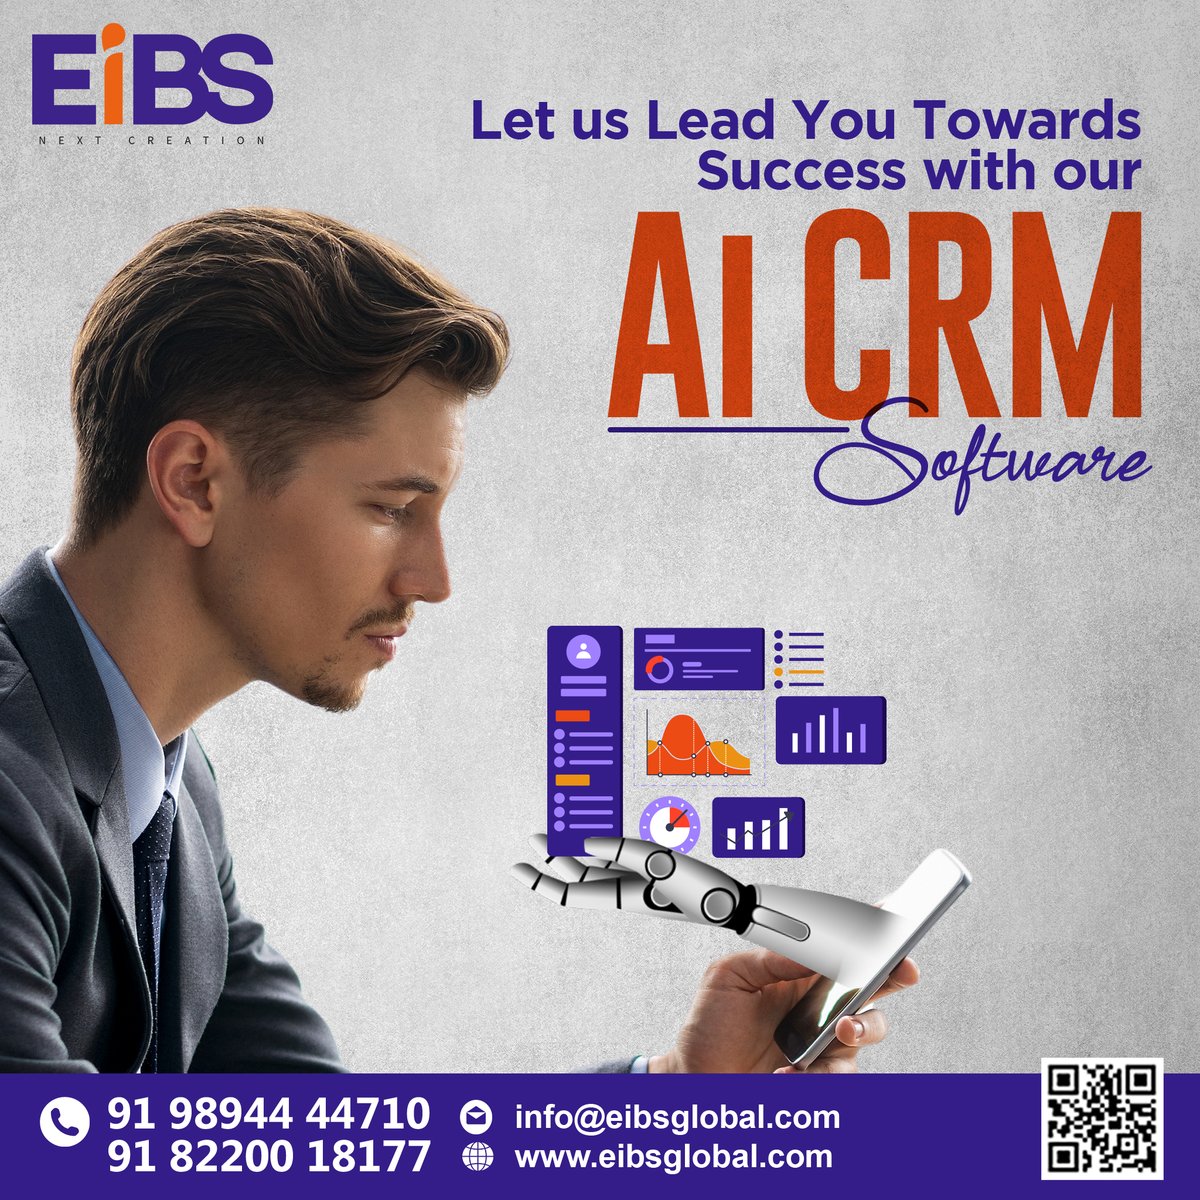 🚀 Ready to achieve new heights? Let our AI CRM software guide you towards success!

📞 Call us now: 98944447

#Websitedevelopment #Websitedesign #EiBS #eibsglobal #websitedevelopementcompany #leadmanagementsoftware #leadmanagementsystem #lead #businesslead #crmsolutions